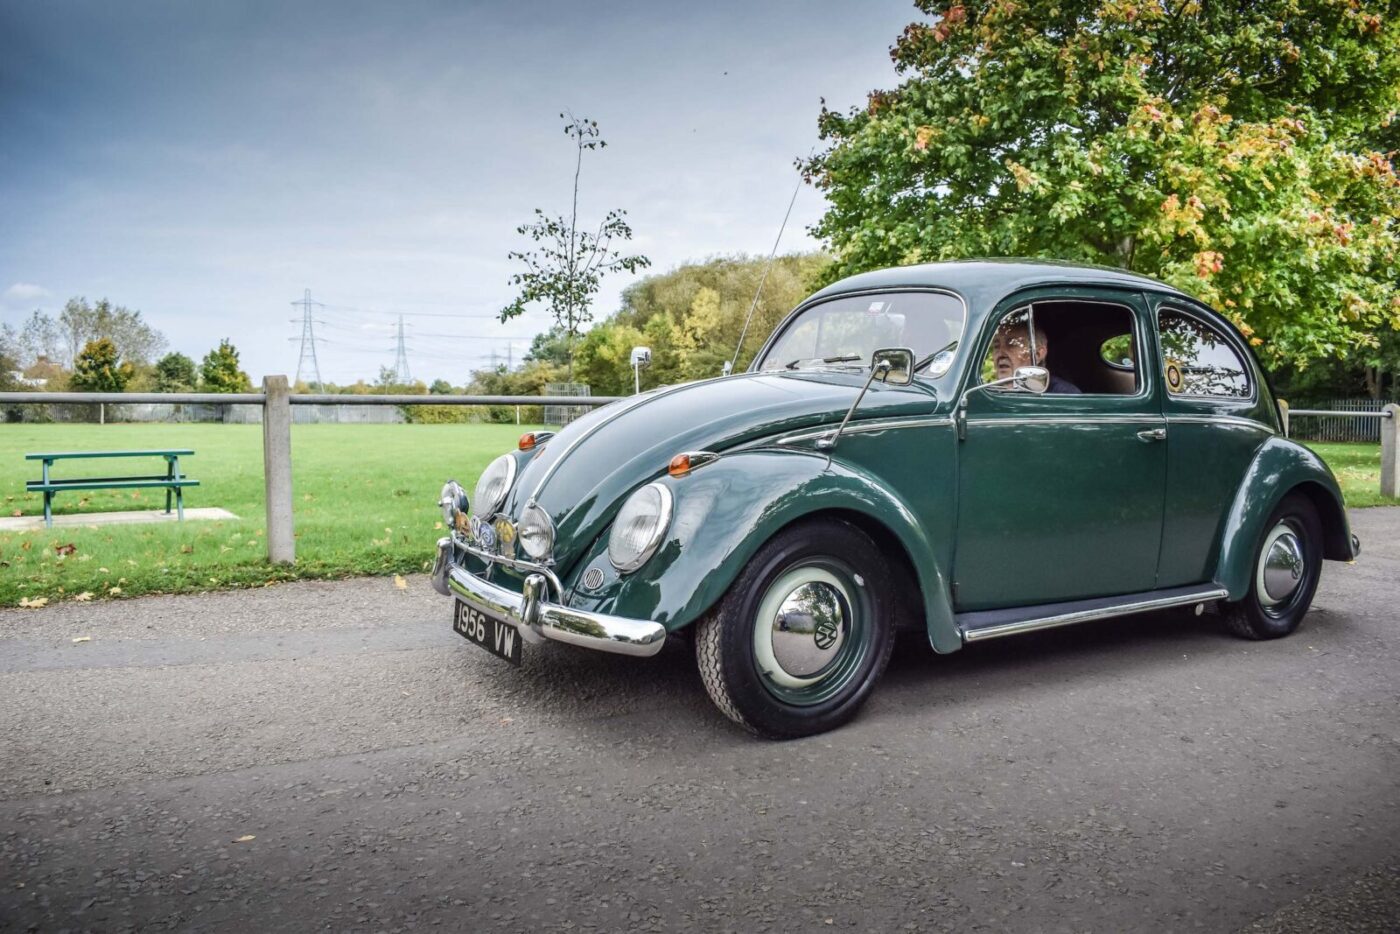 The love bug: the story of a remarkable Beetle : Forever Cars | Adrian Flux